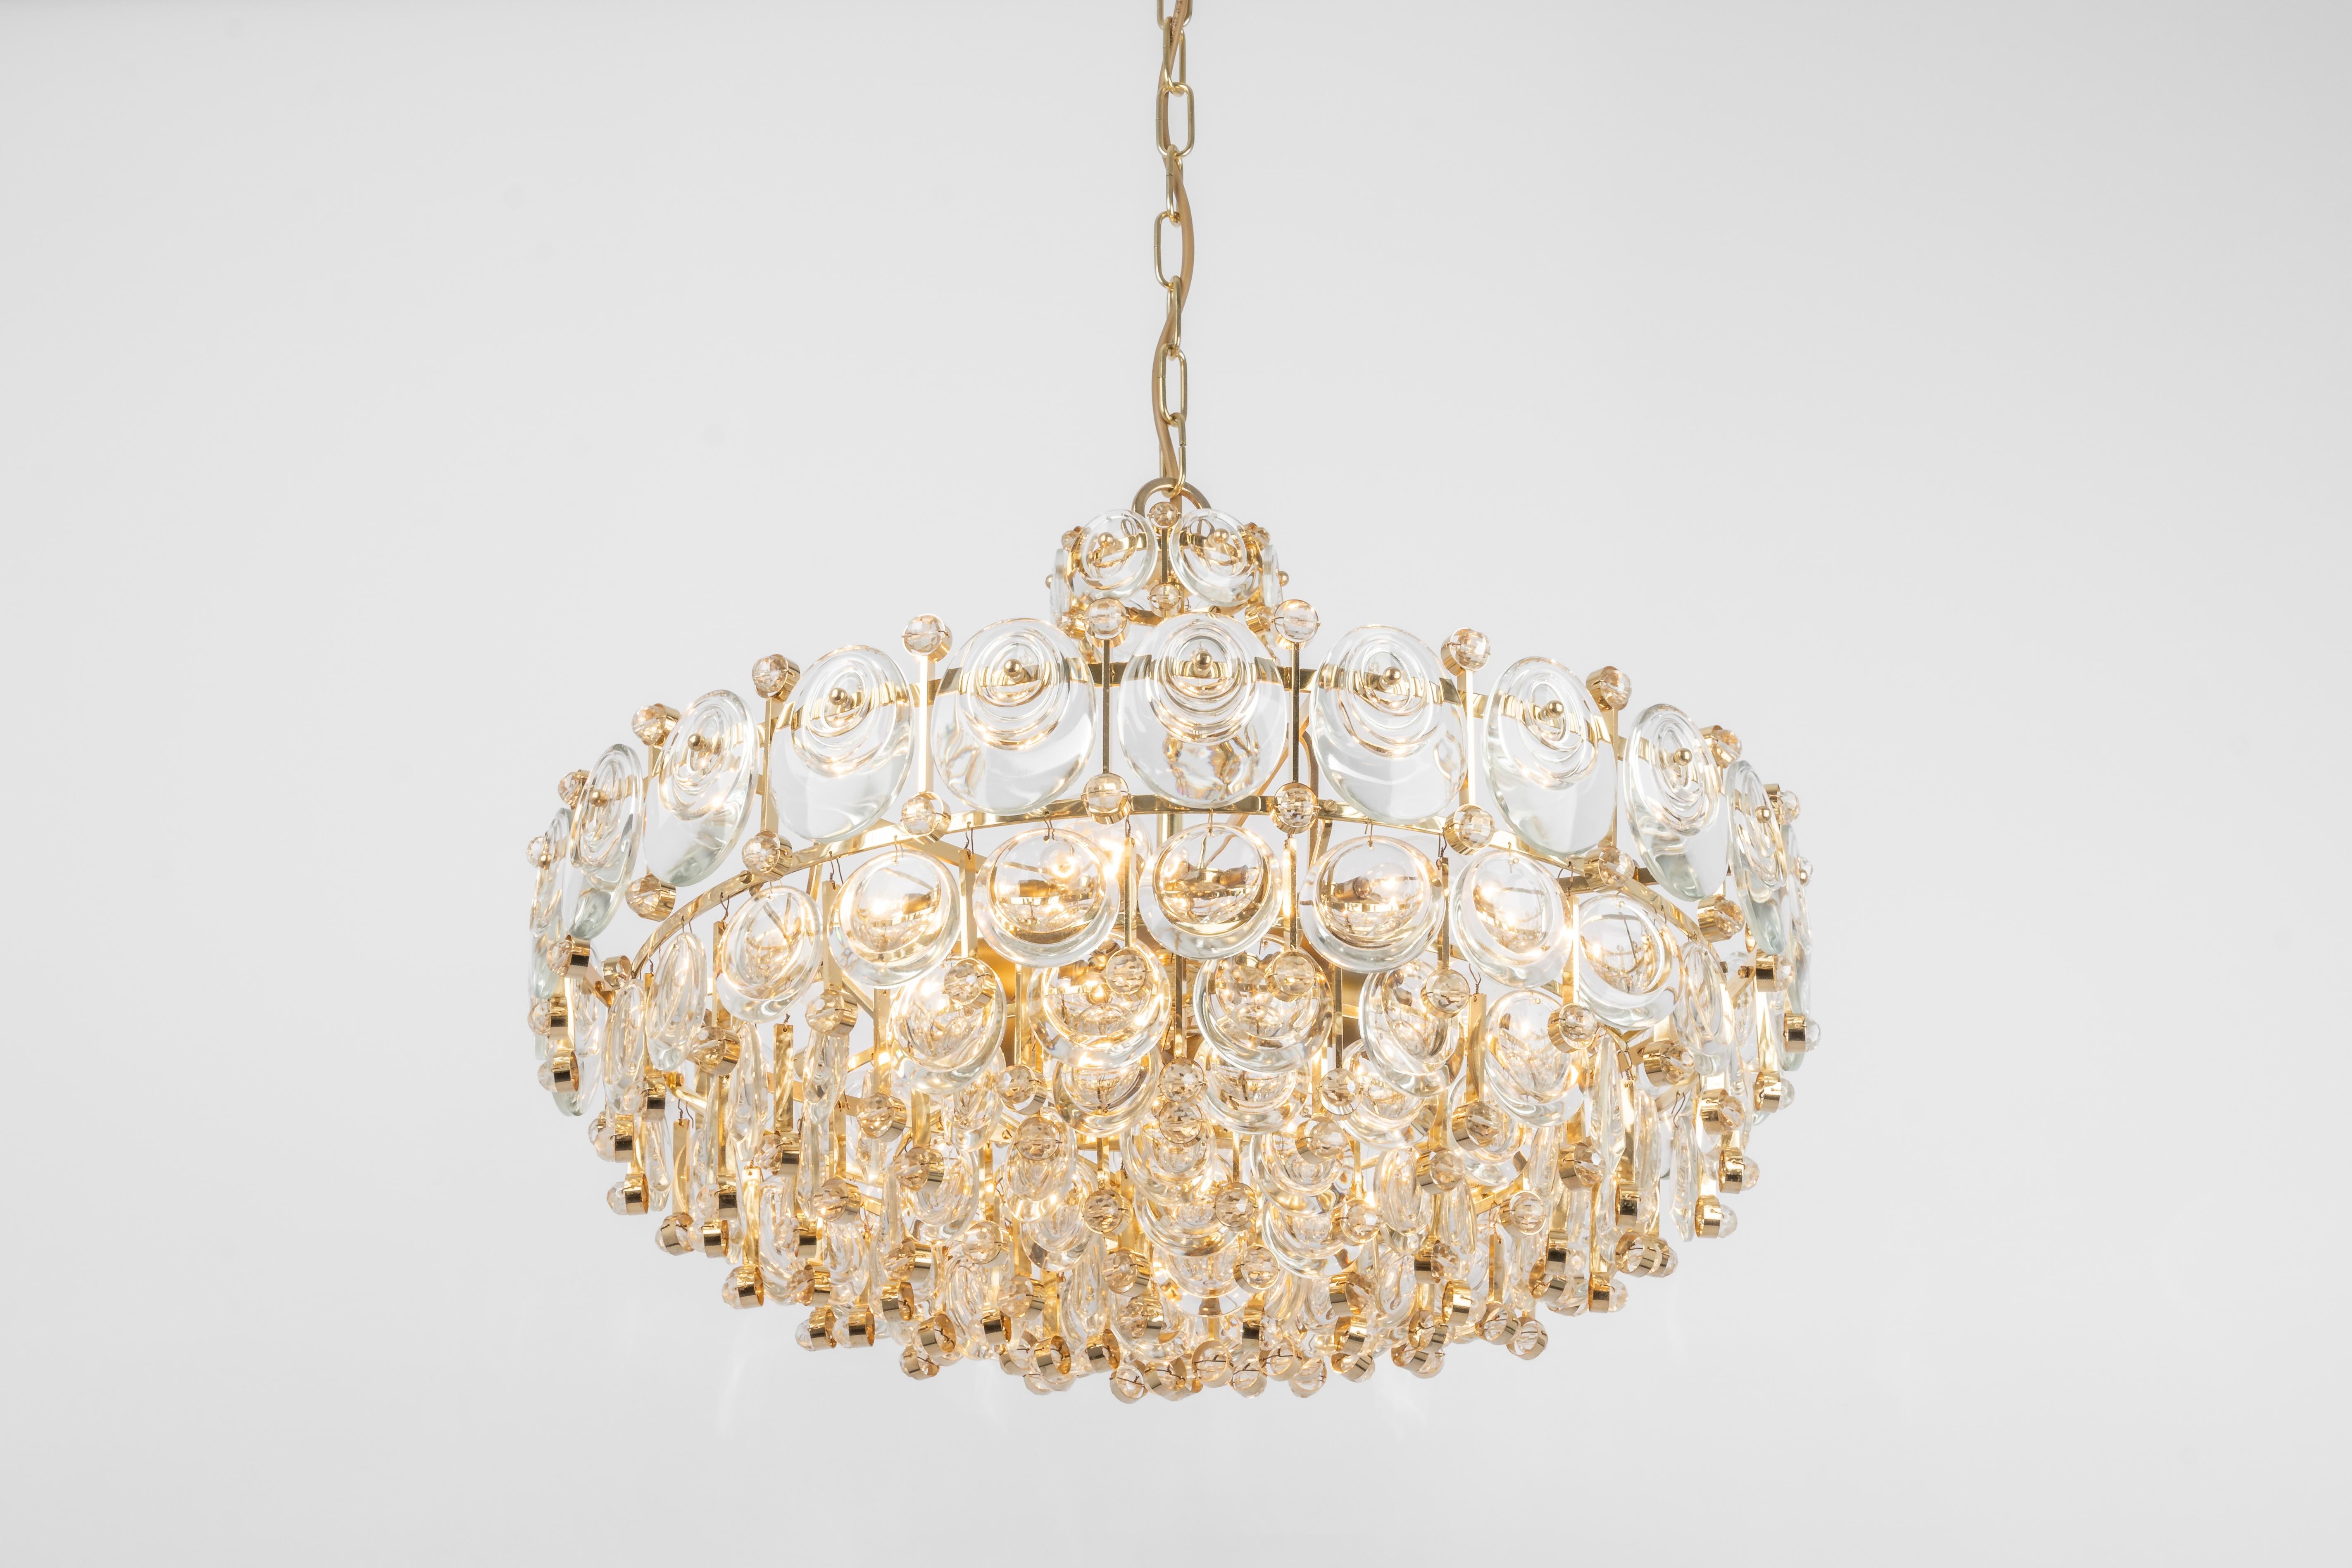 Delicate Gilt Brass Crystal Chandelier by Palwa, Sciolari Design, Germany, 1970s For Sale 9